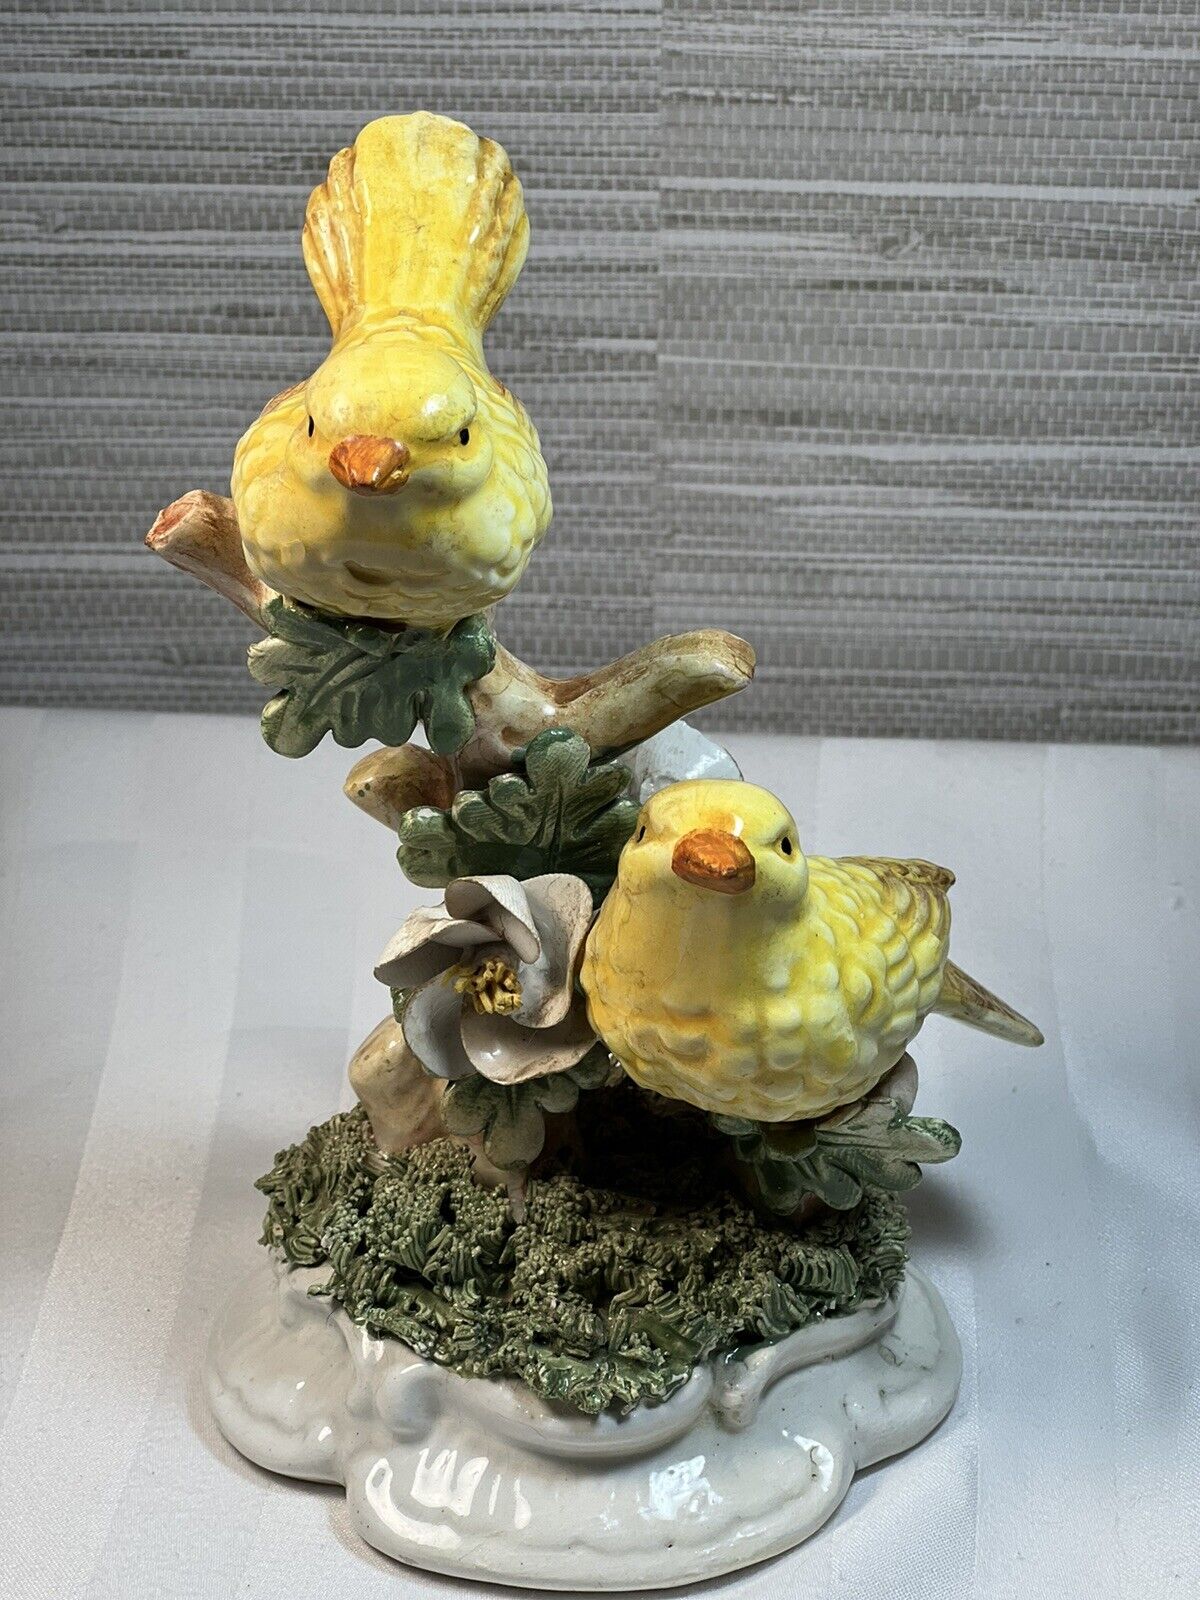 Vintage Yellow Canary Birds Sculpture Figurine, Ceramic, Italy Marked GL/7